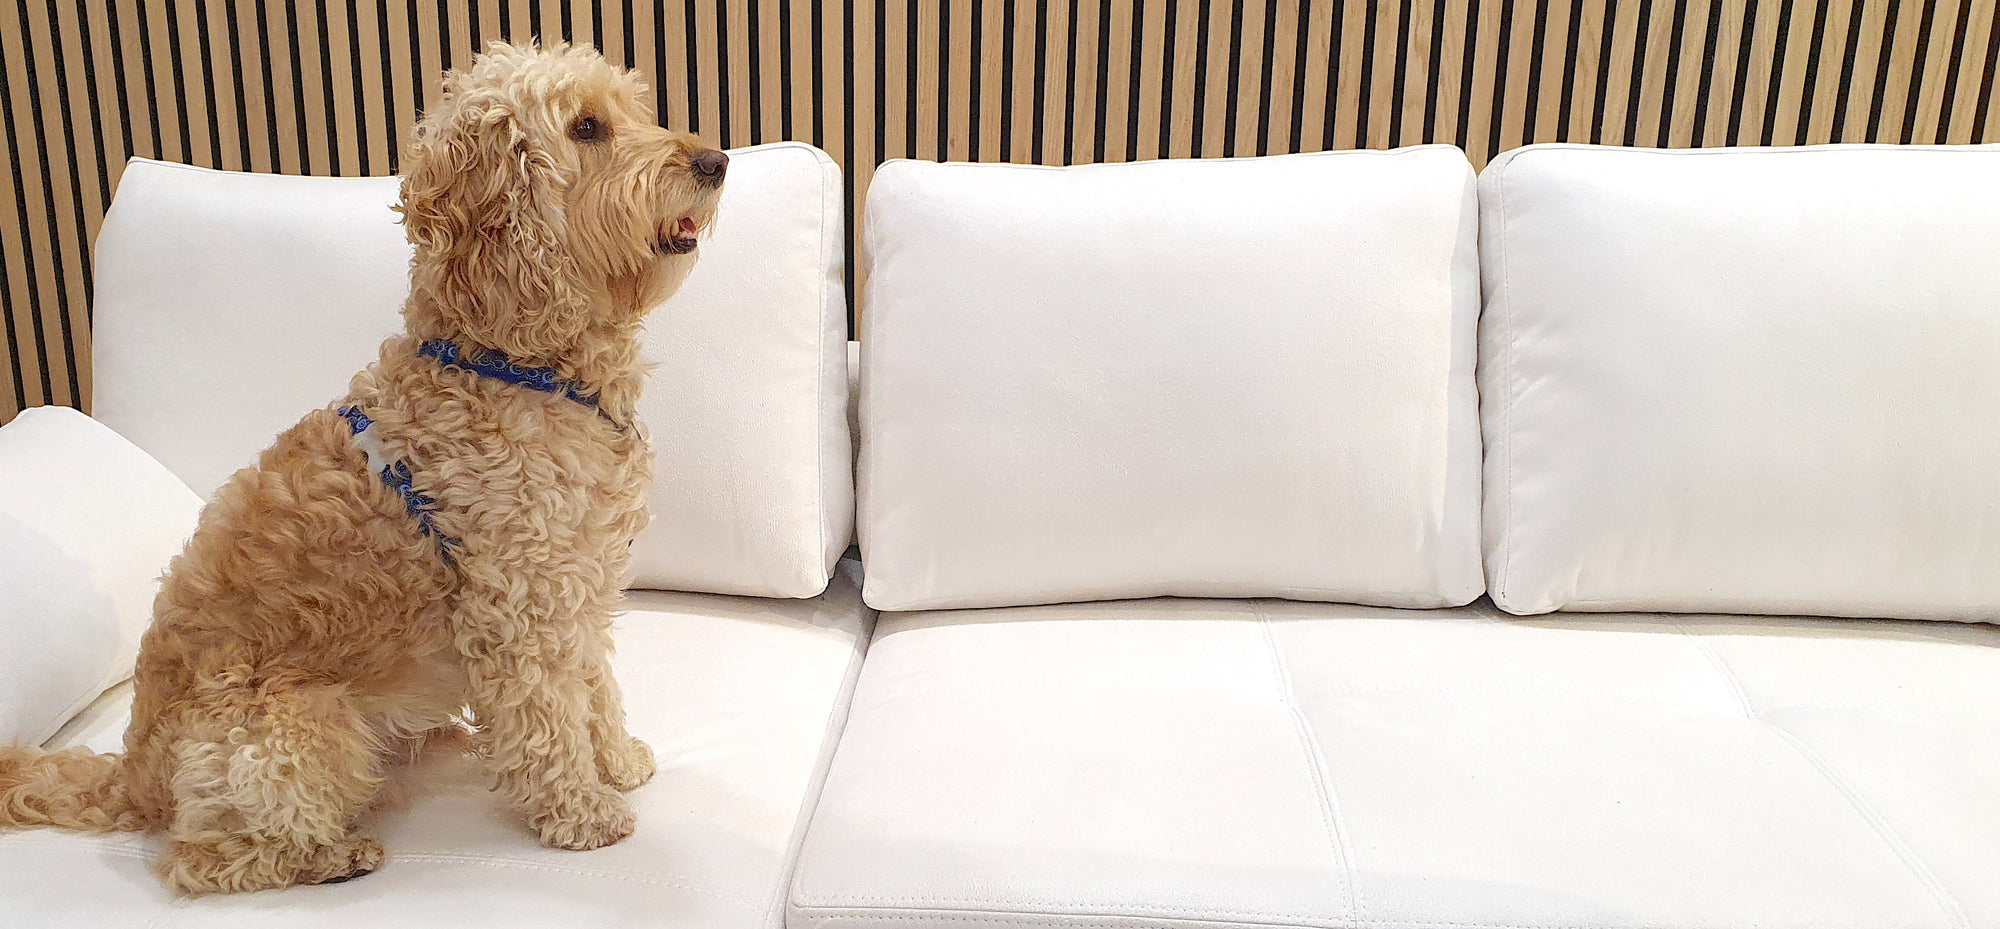 Pet Friendly Fabrics - What Are They?